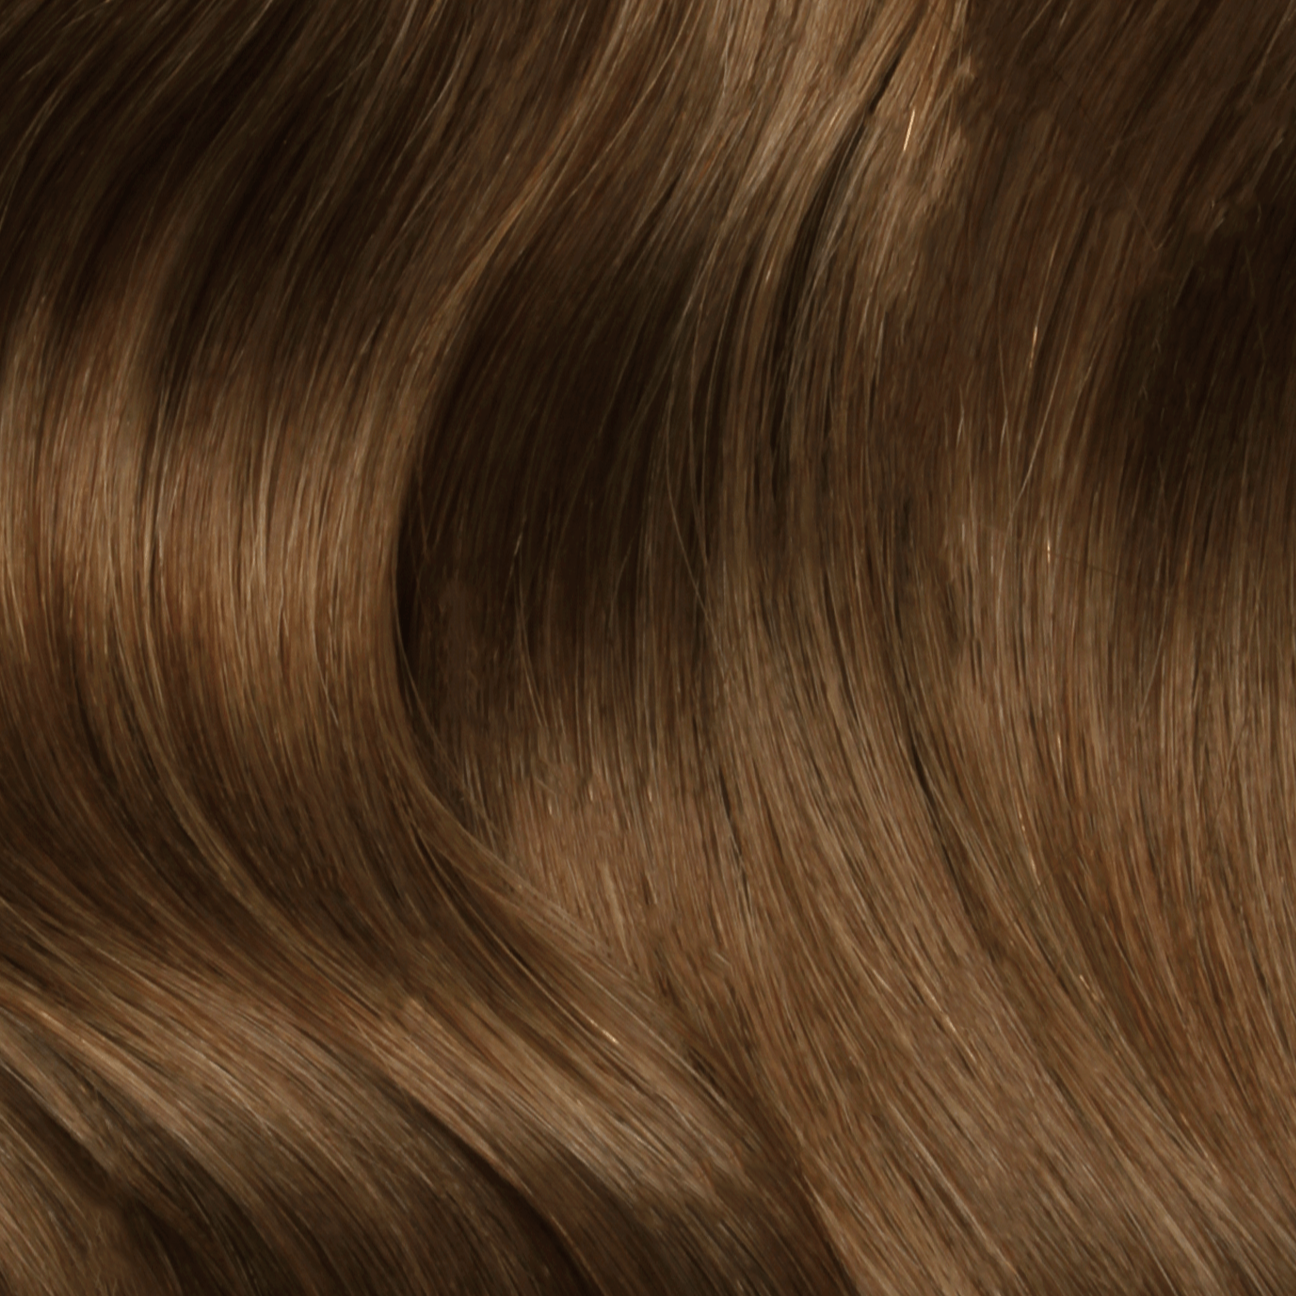 Nano Bonds 20 Inches - SWAY Hair Extensions Chestnut-Brown-4 Ultra-fine, invisible bonds for a flawless, natural look. 100% Remy Human hair, lightweight and versatile. Reusable and perfect for individual or salon use.